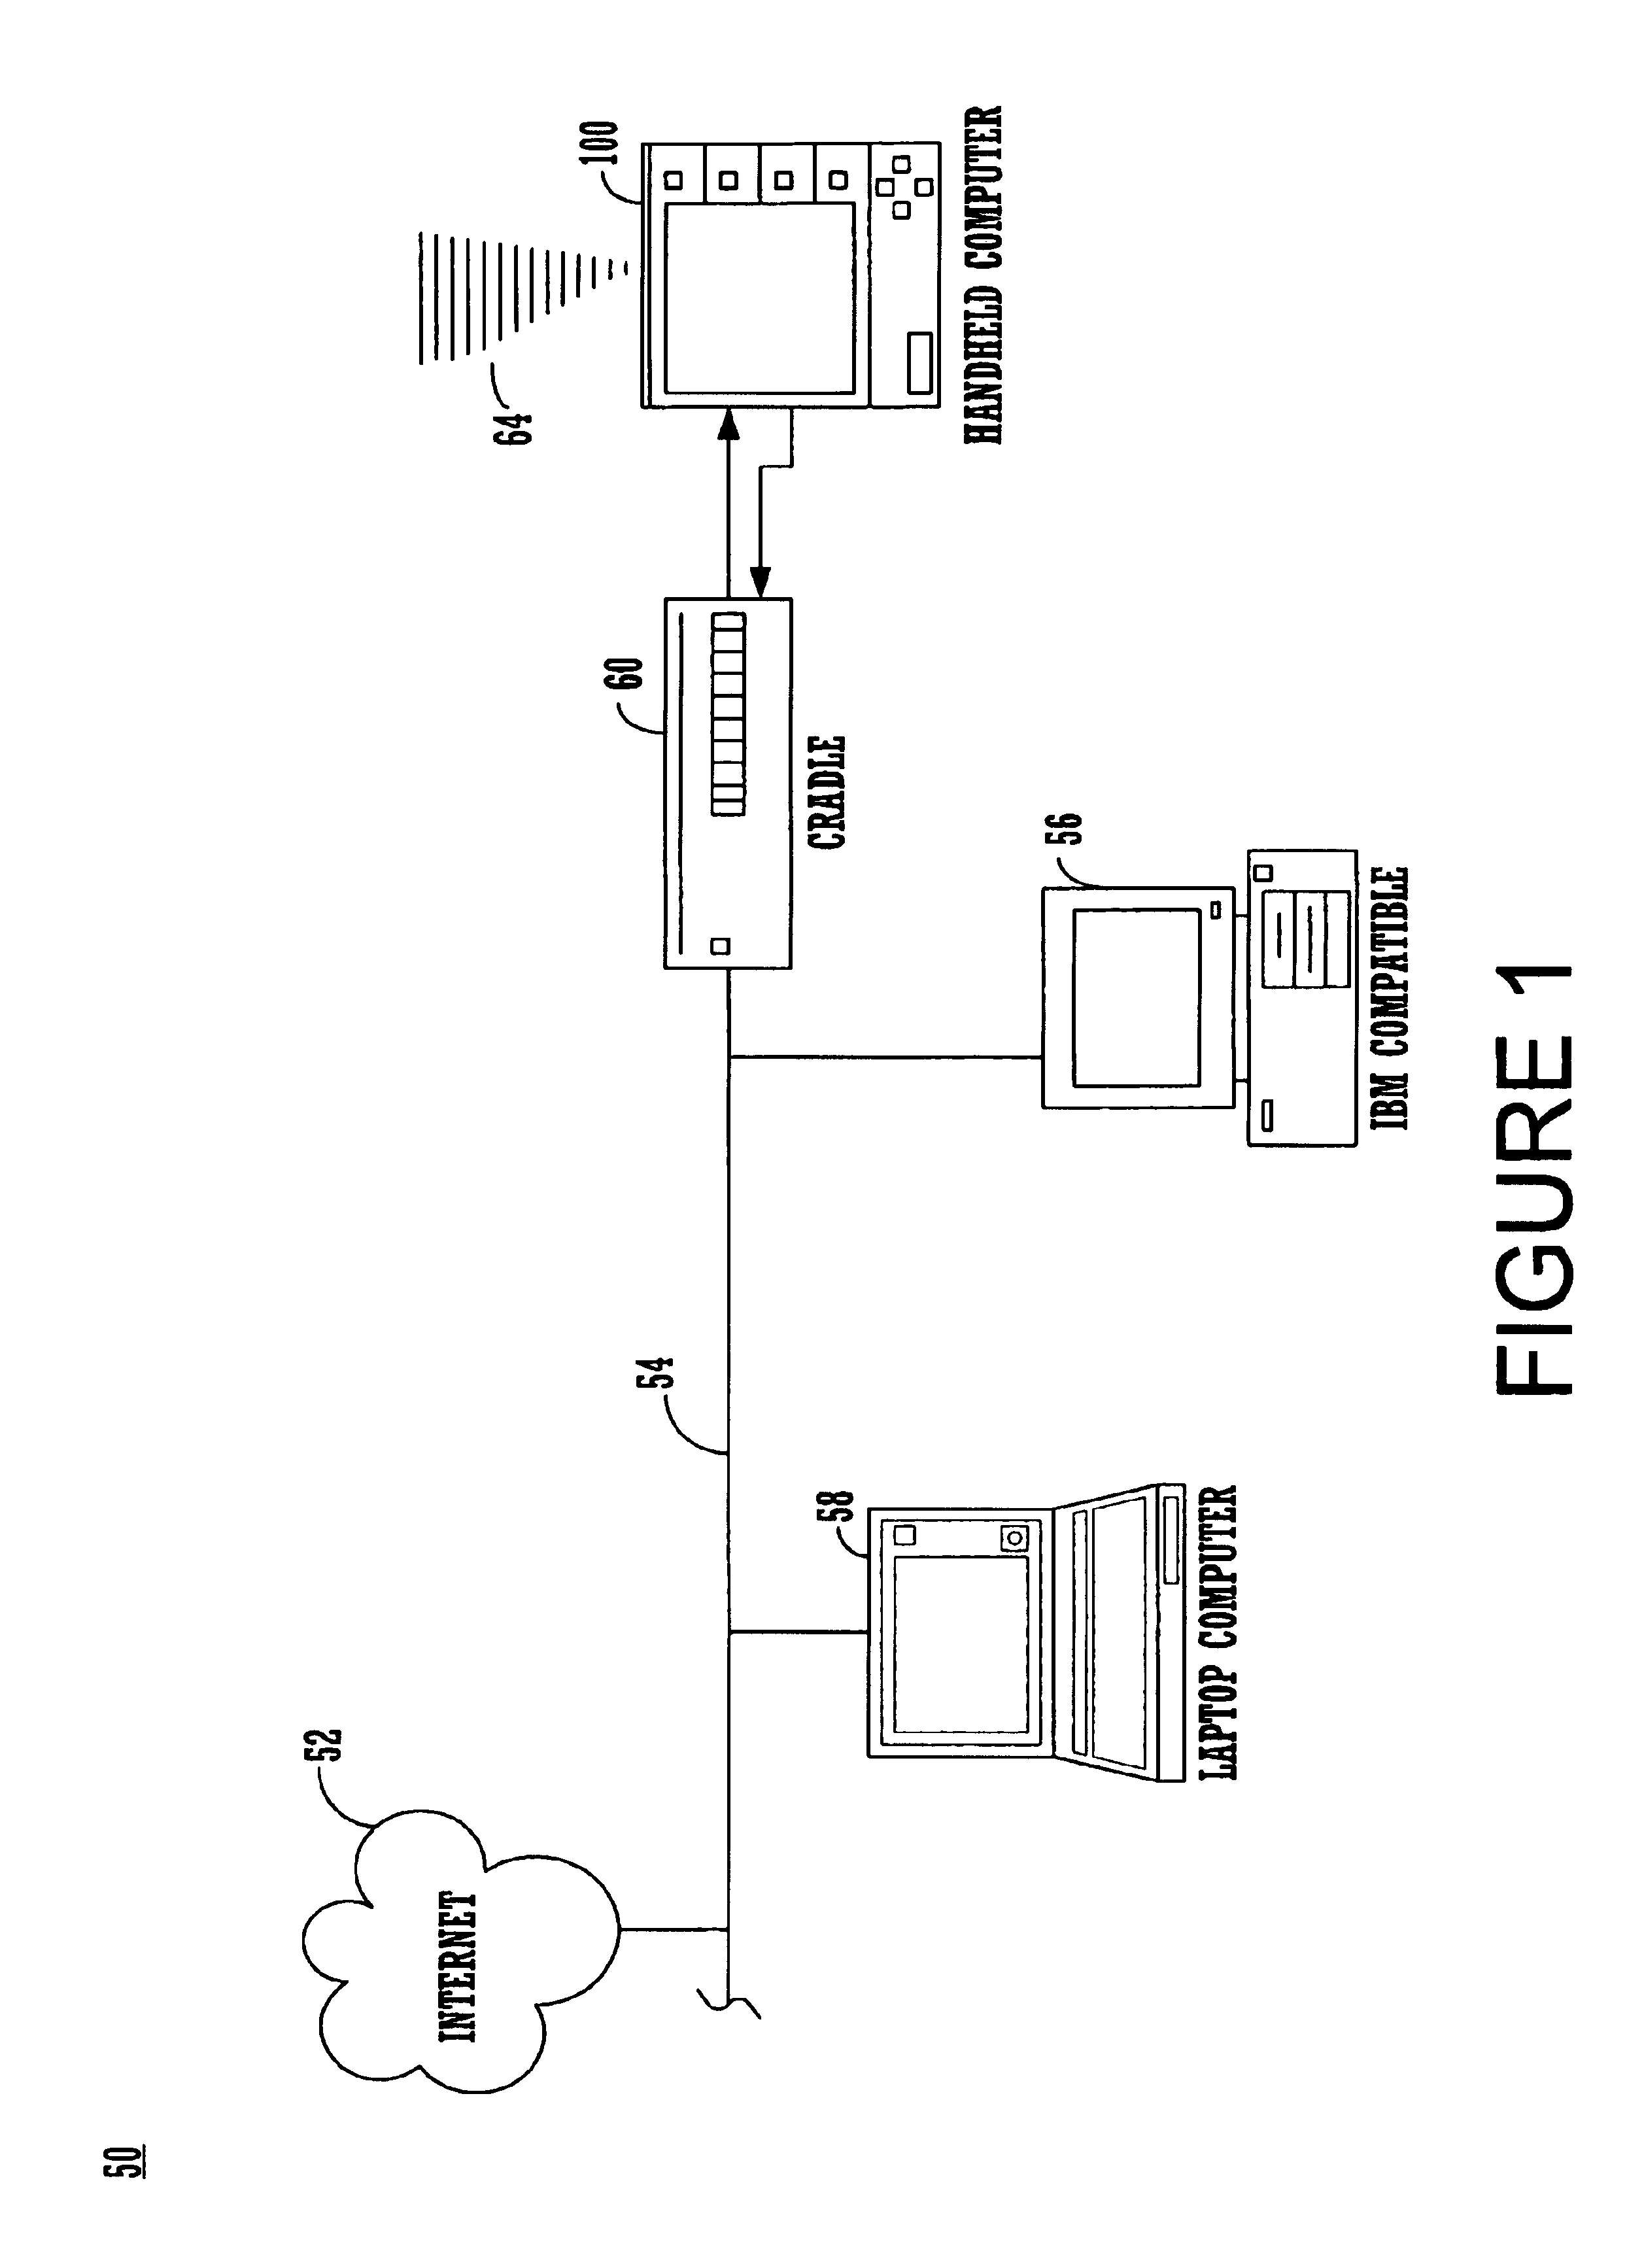 Method and apparatus for fault-tolerant update of flash ROM contents